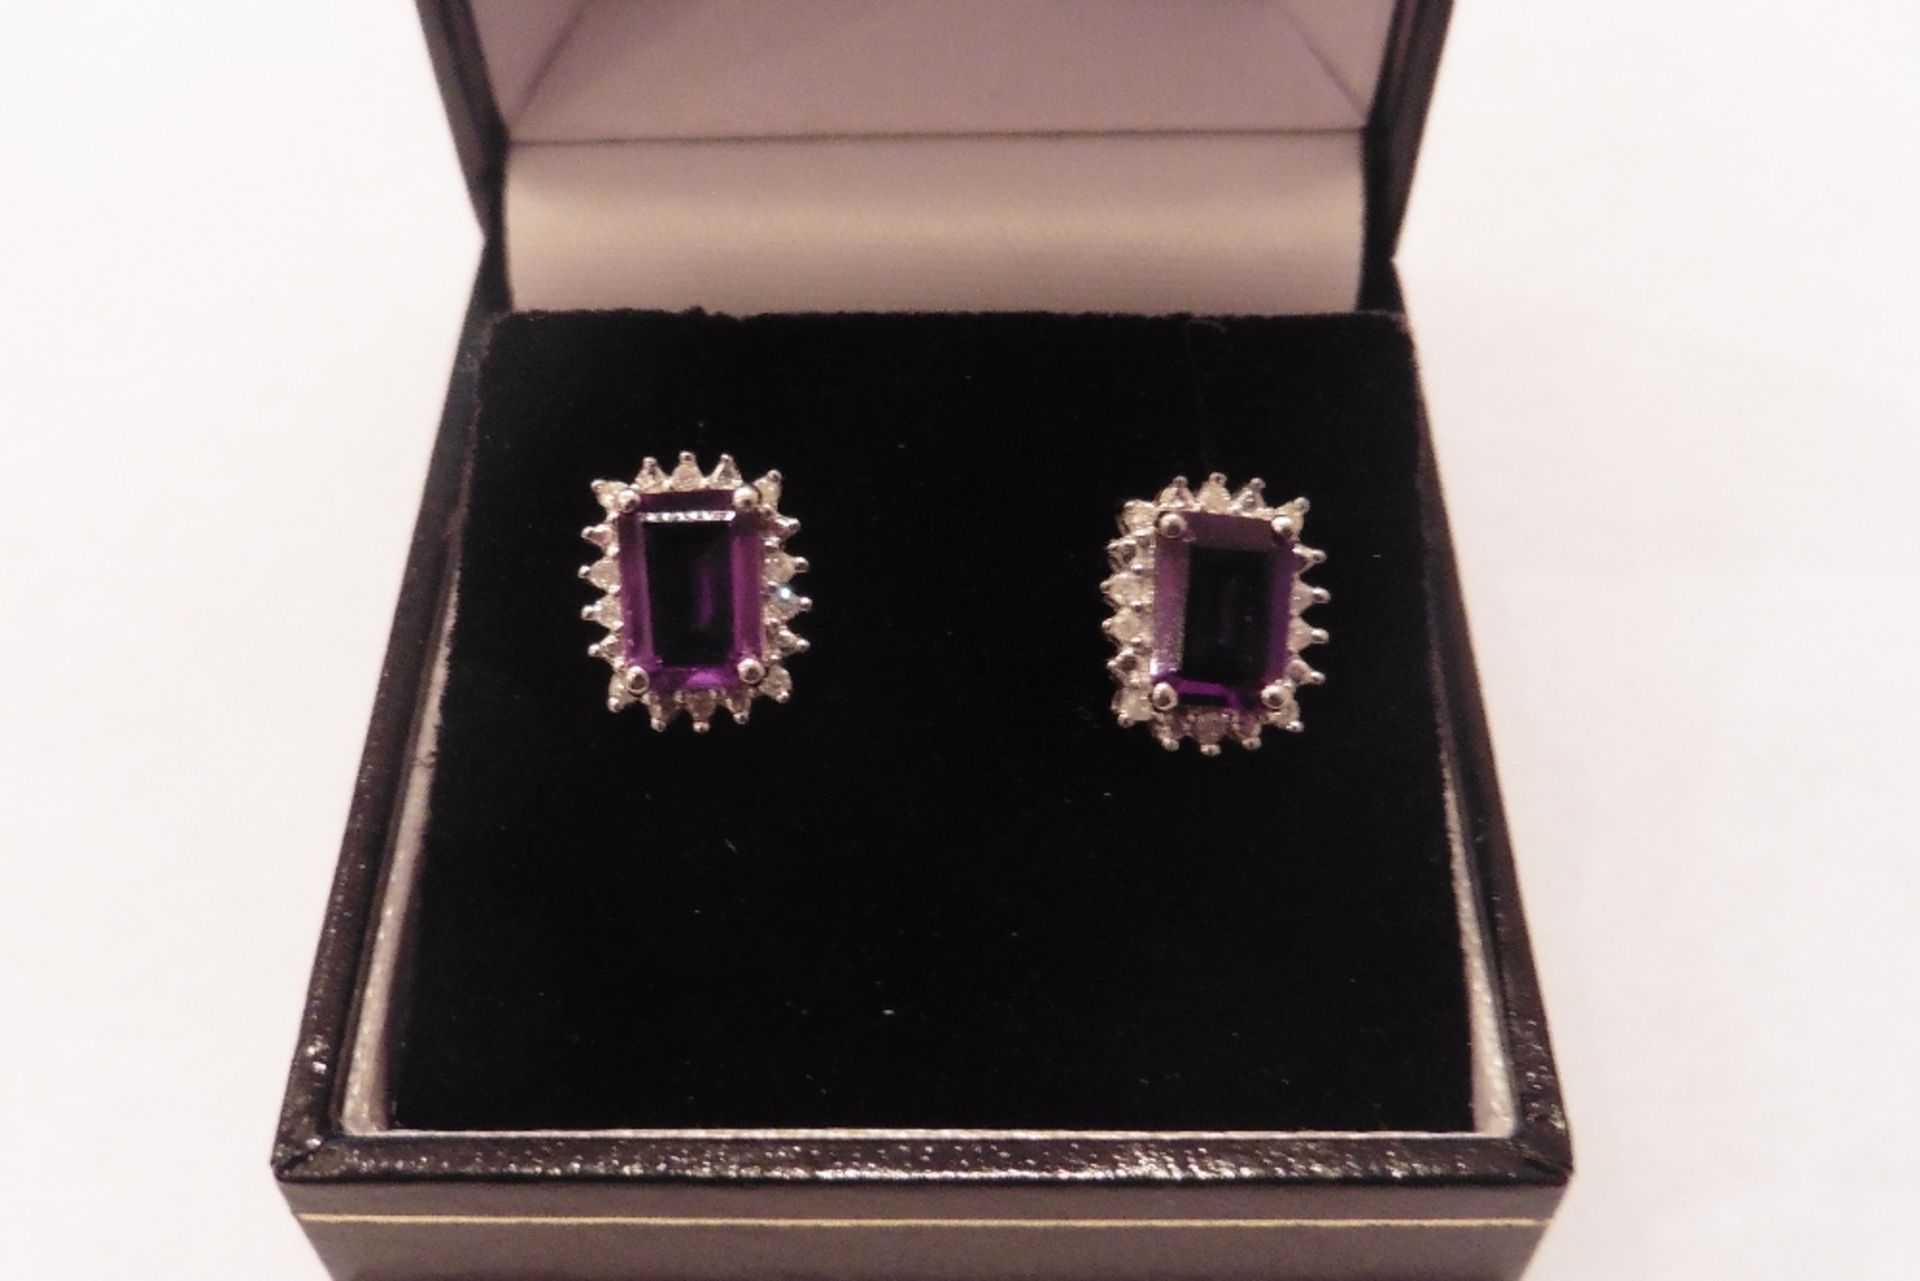 9ct white gold amethyst and diamond earrings each set with a emerald cut amethyst, total weight is 1